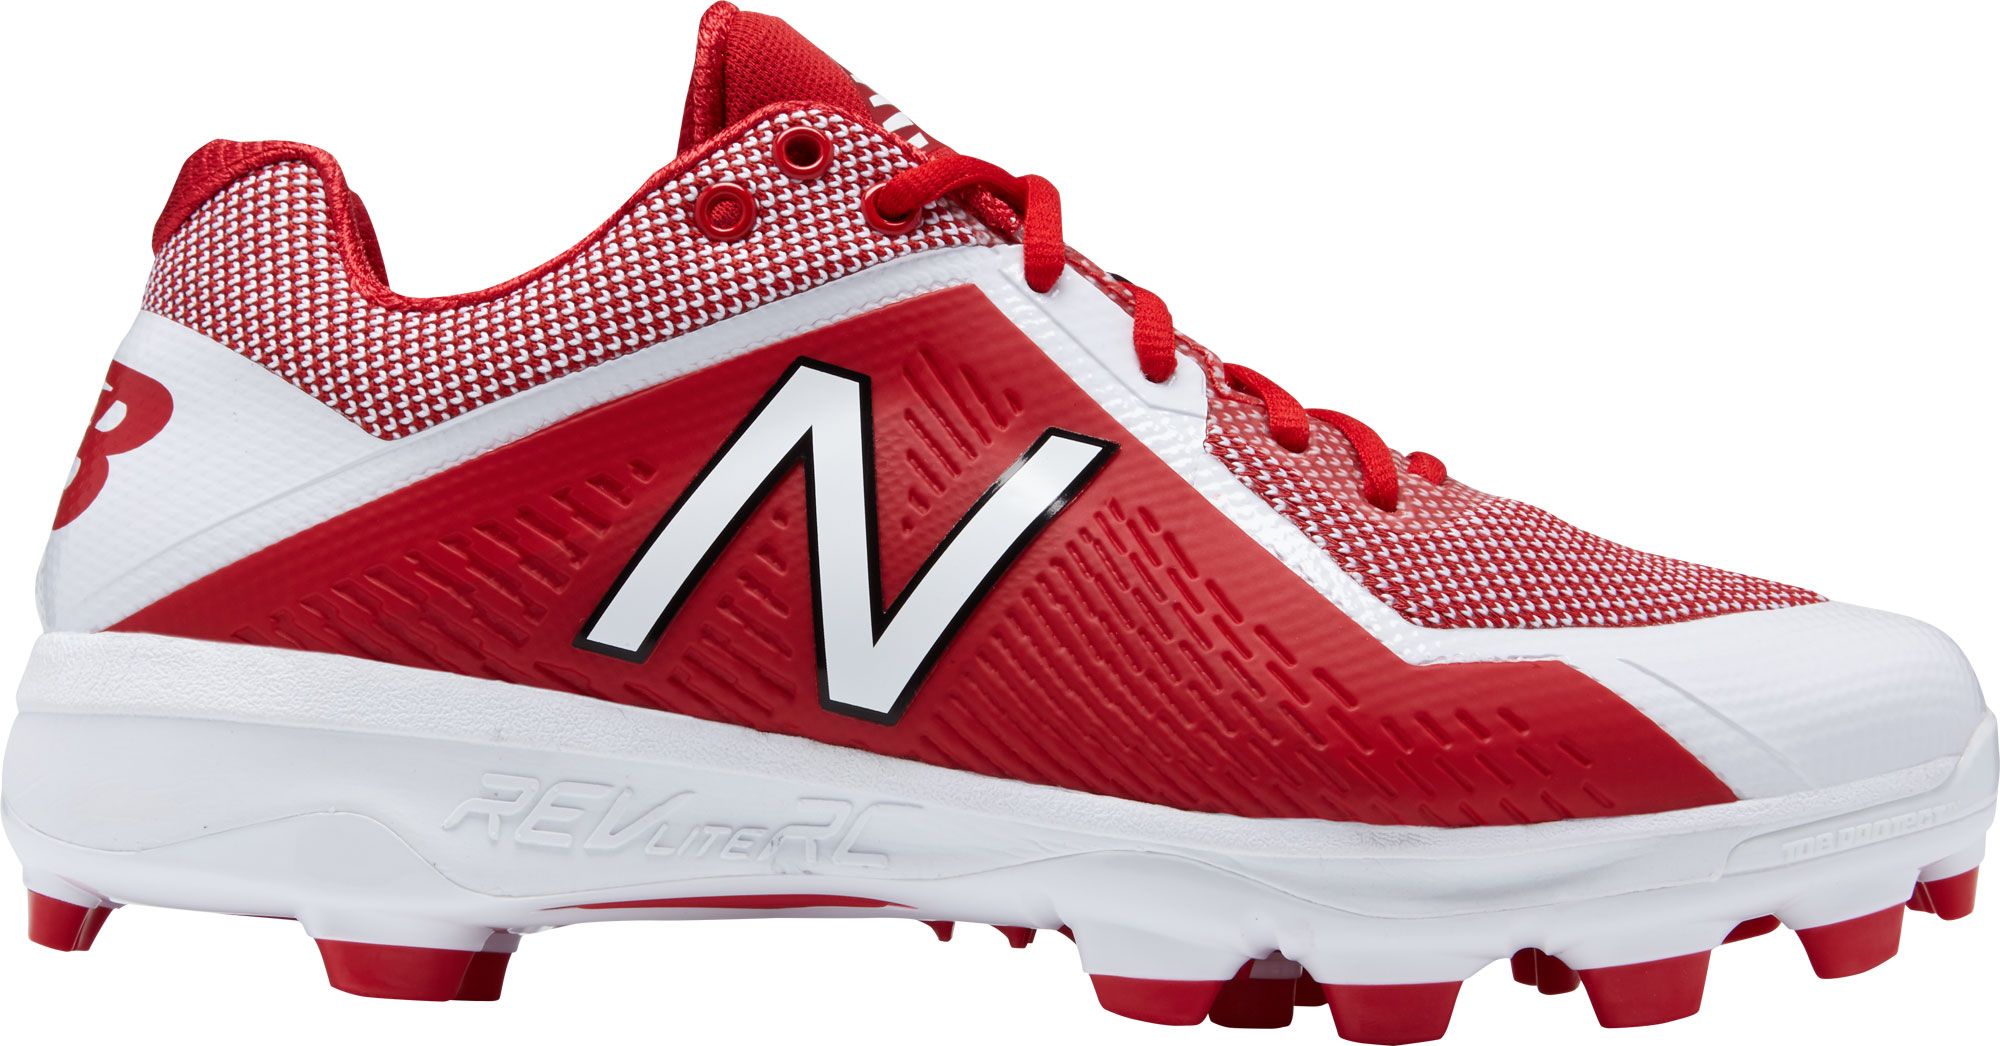 red and white new balance baseball cleats